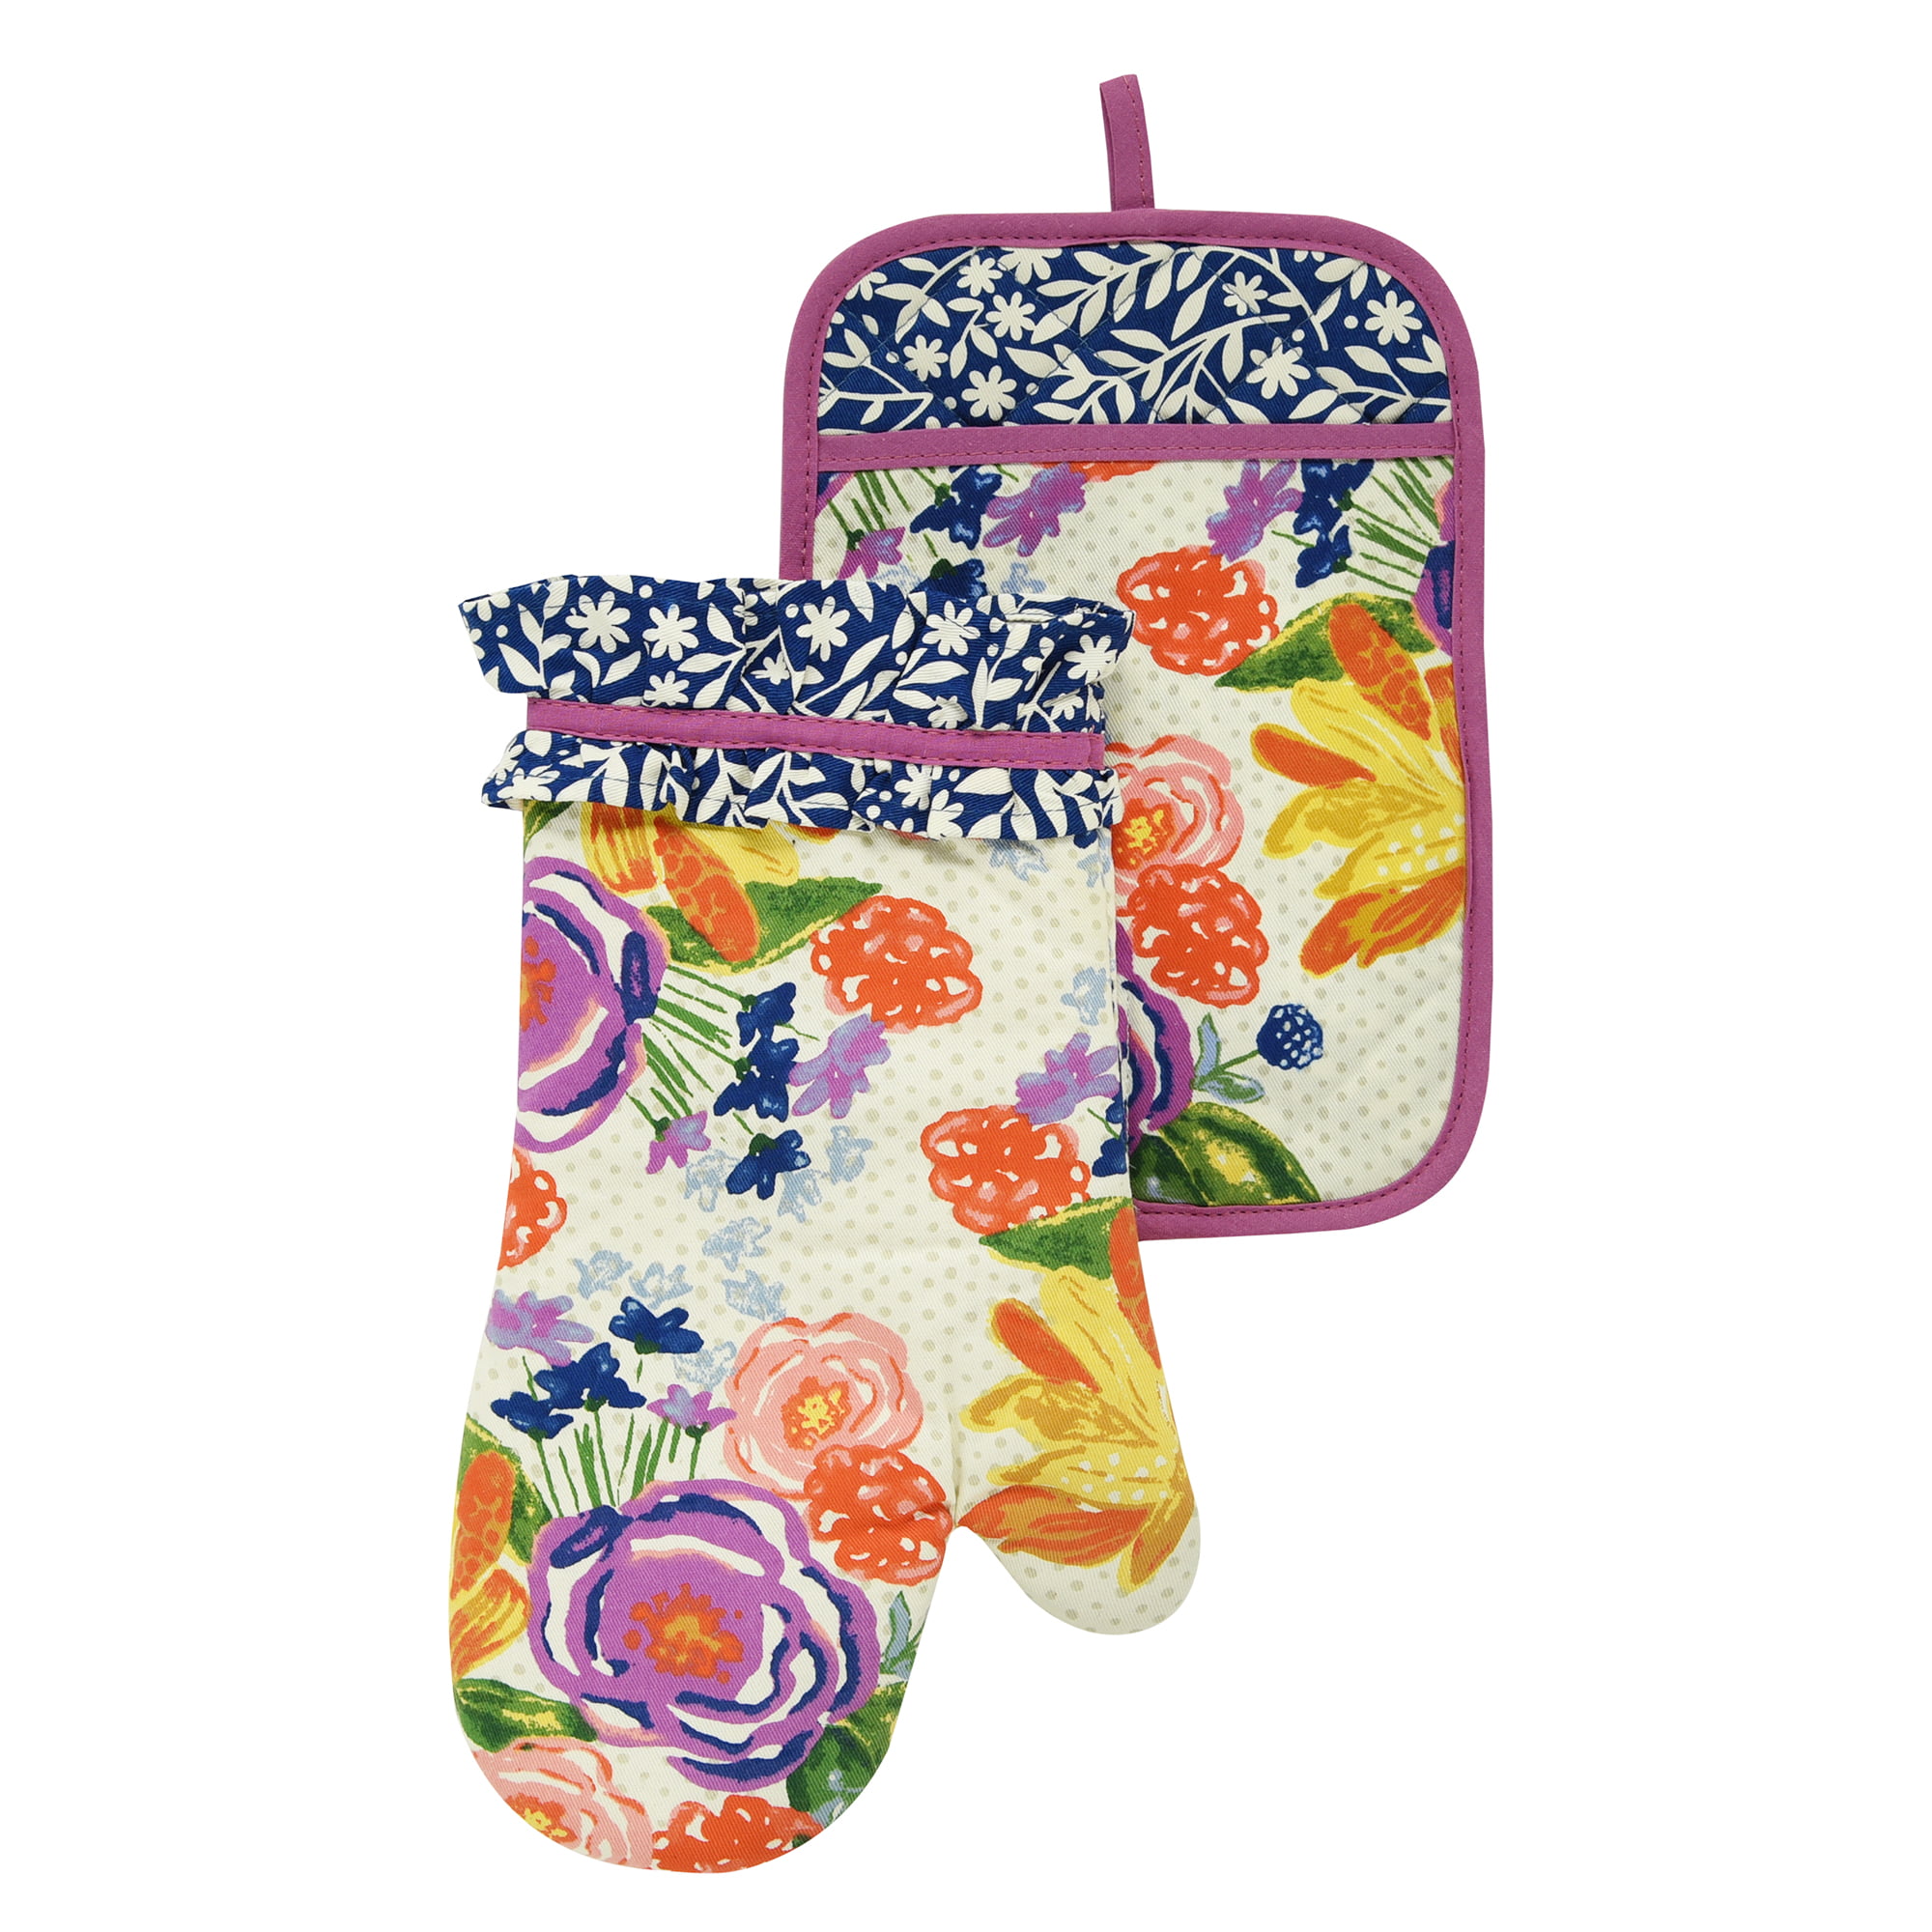  Kitchen Oven Mitts and Pot Holders Sets,The Pioneer